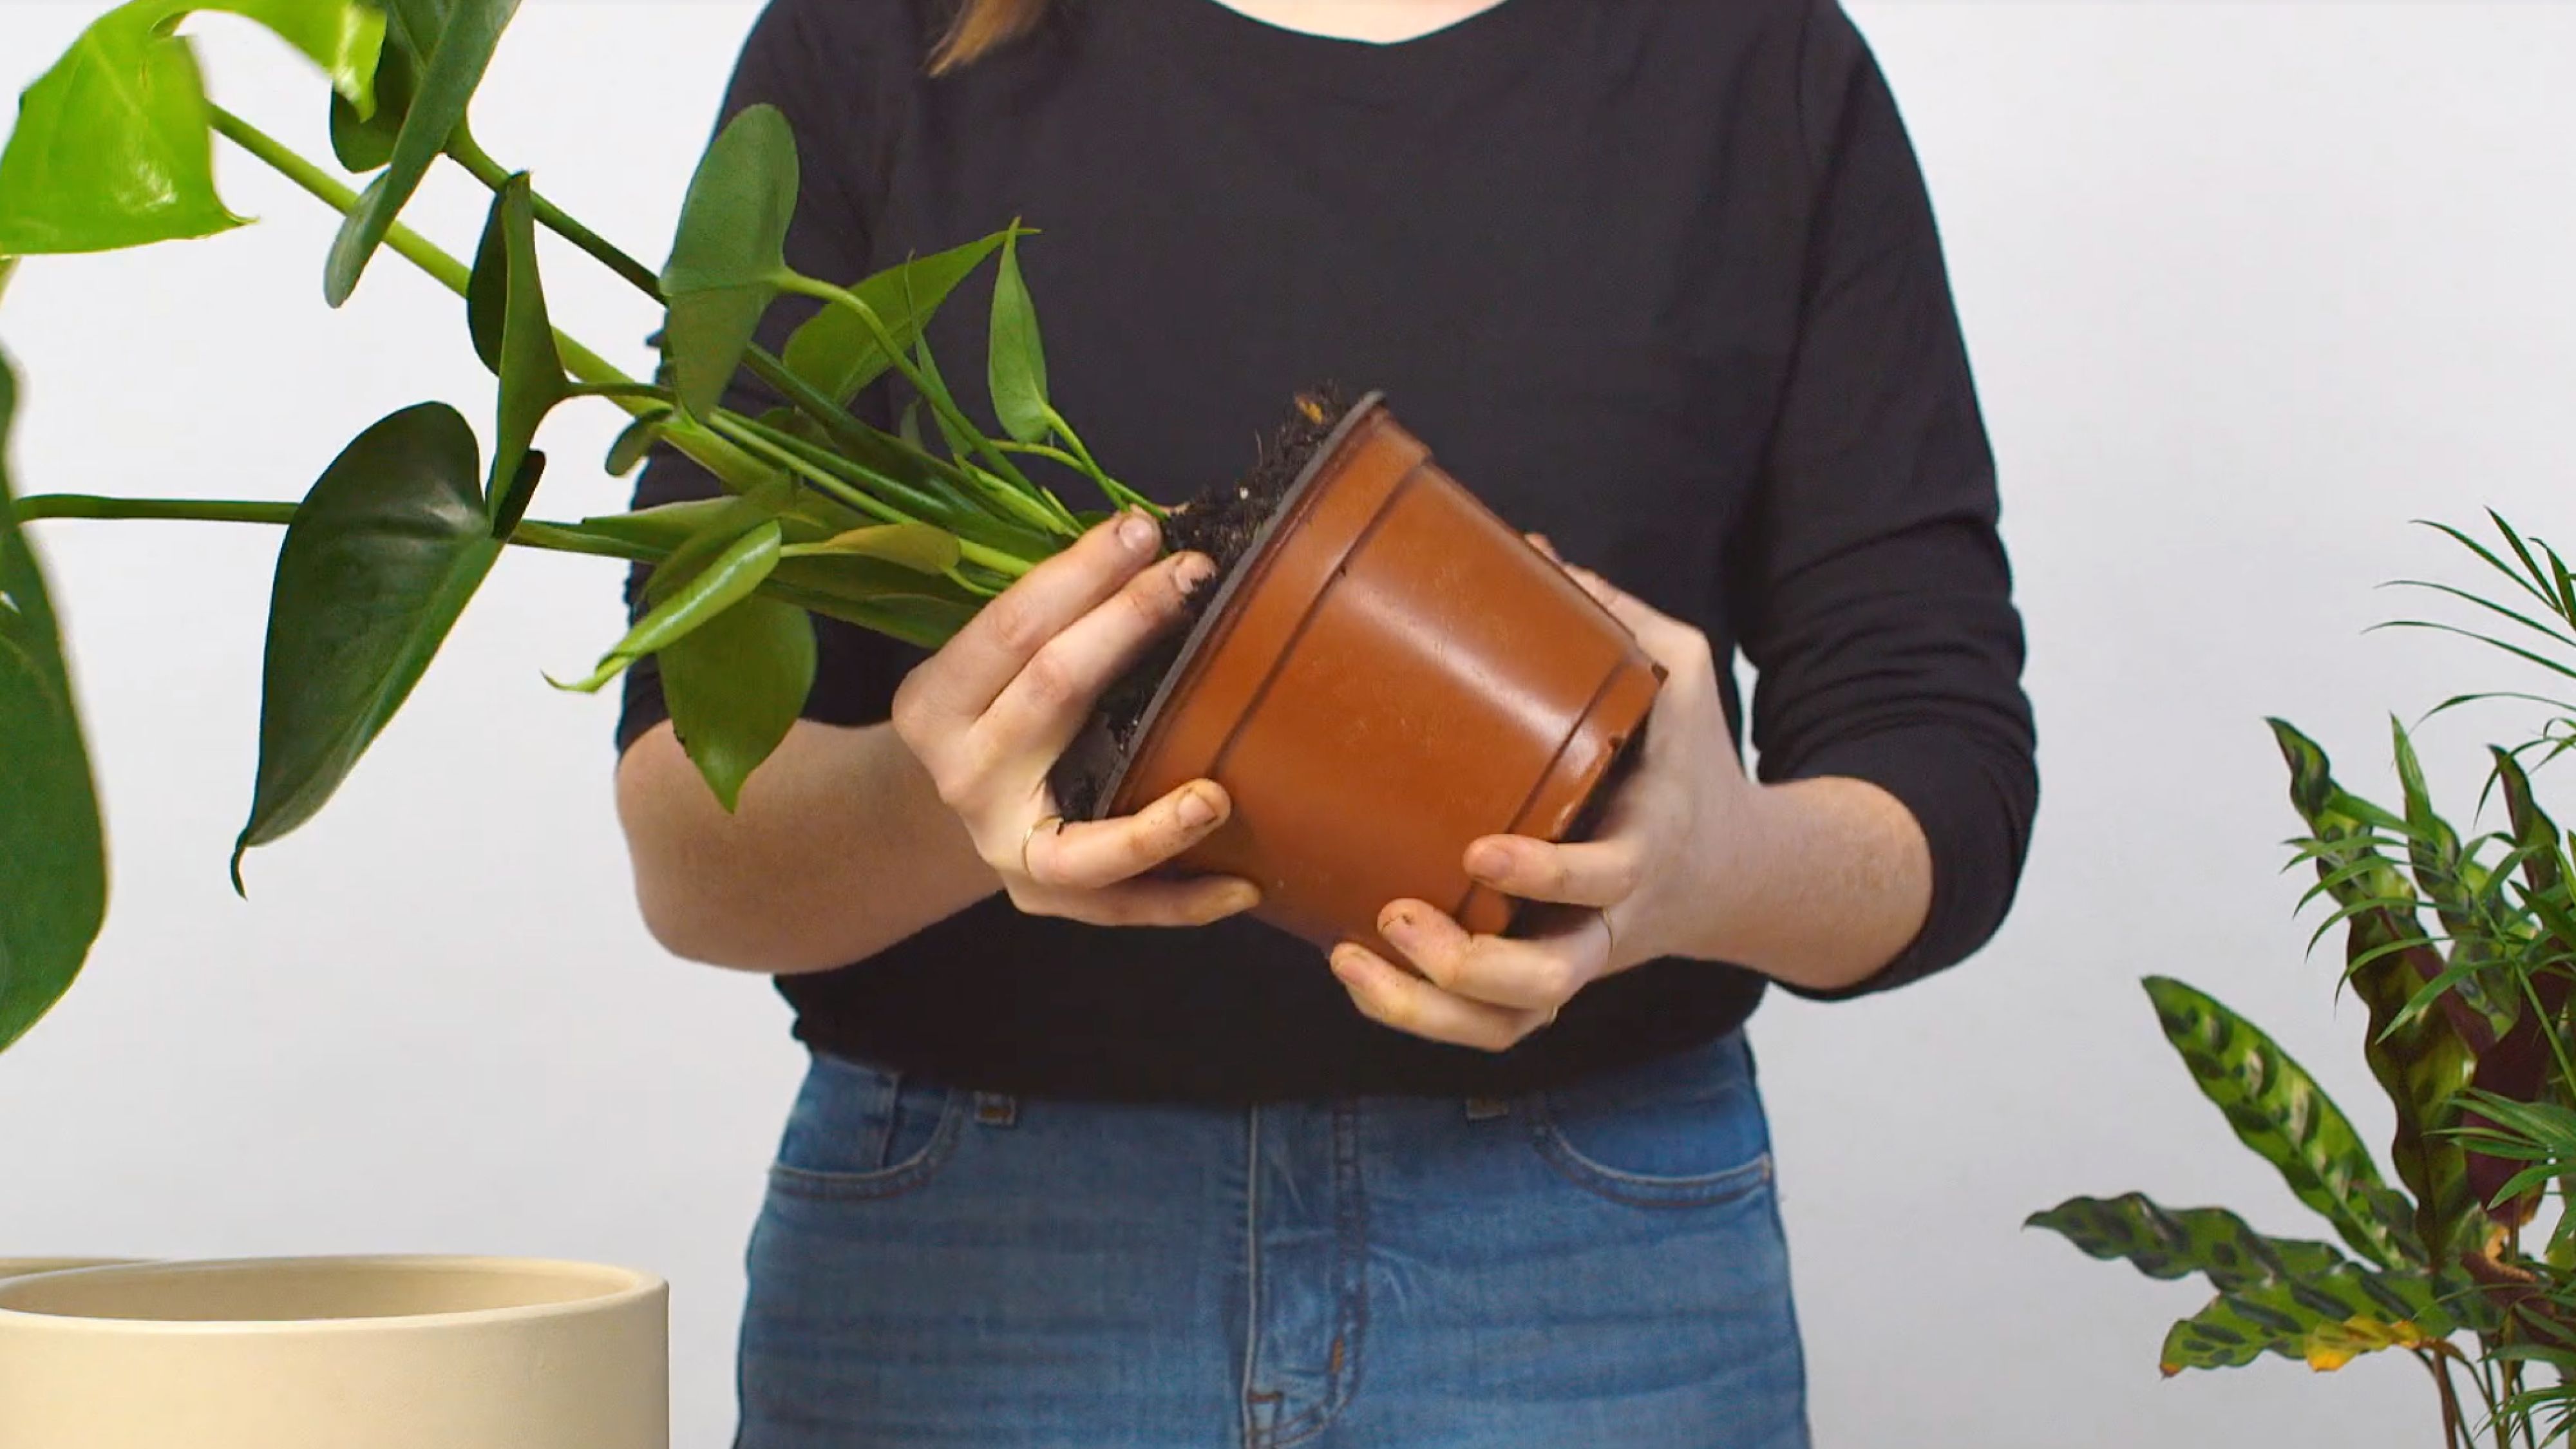 4. Carefully remove the plant from its current pot